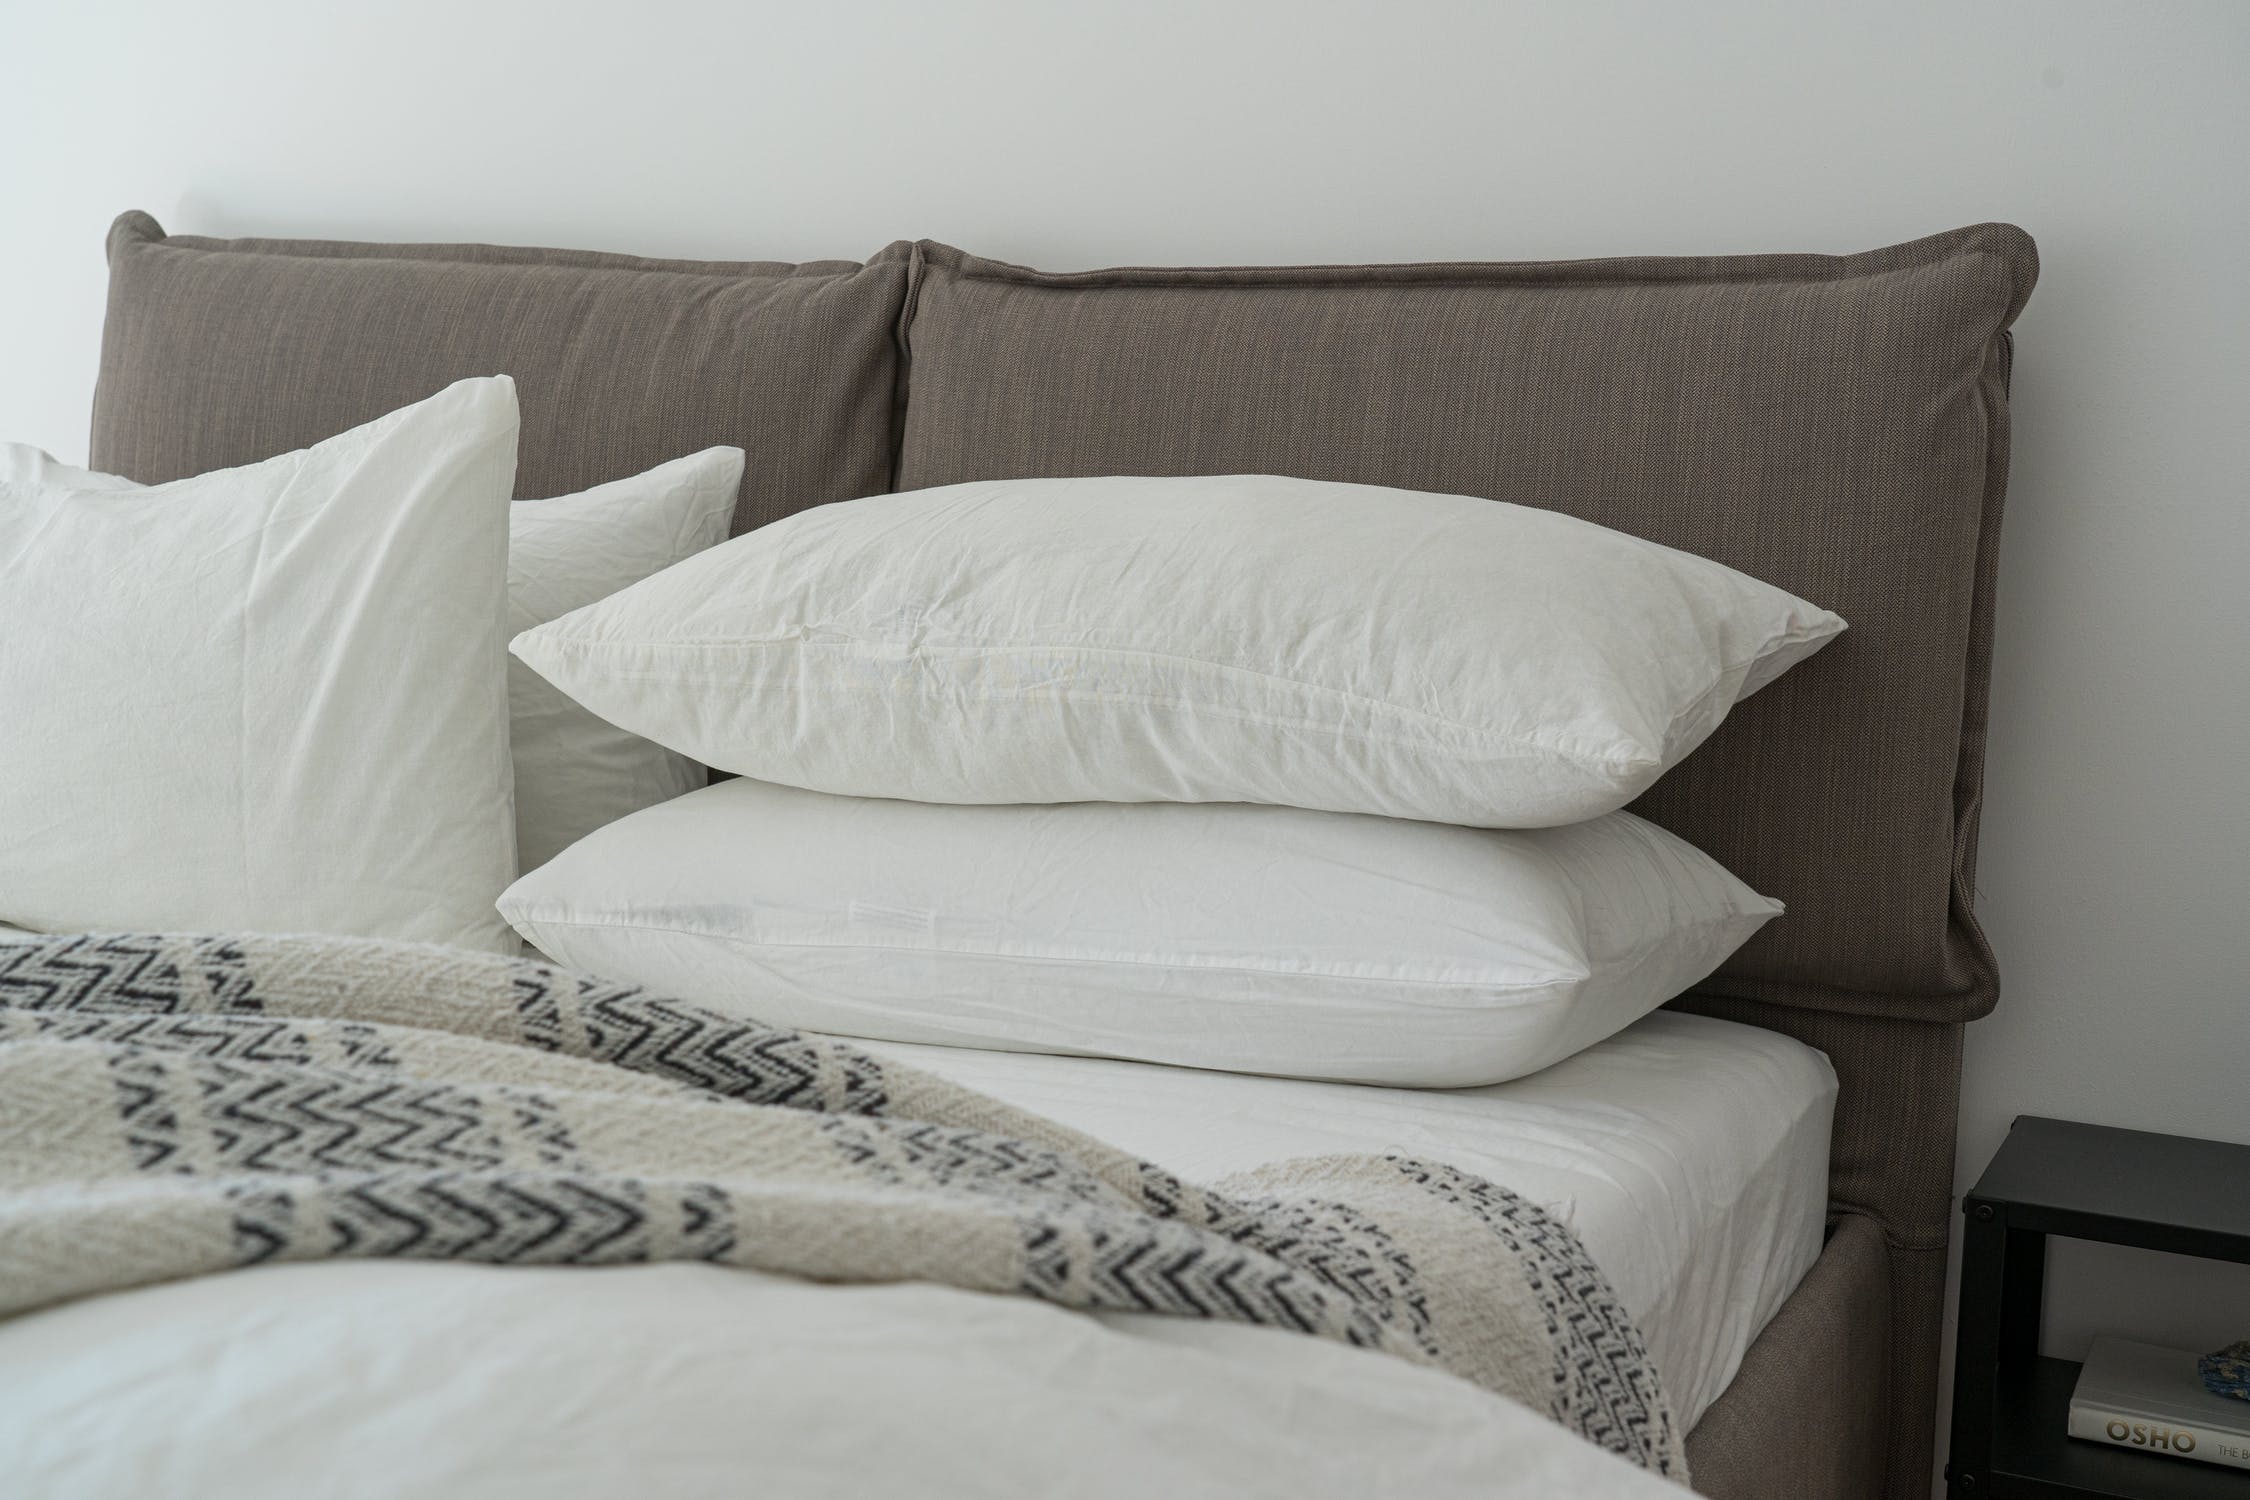 5 Reasons Why You Should Switch to Bamboo Sheets